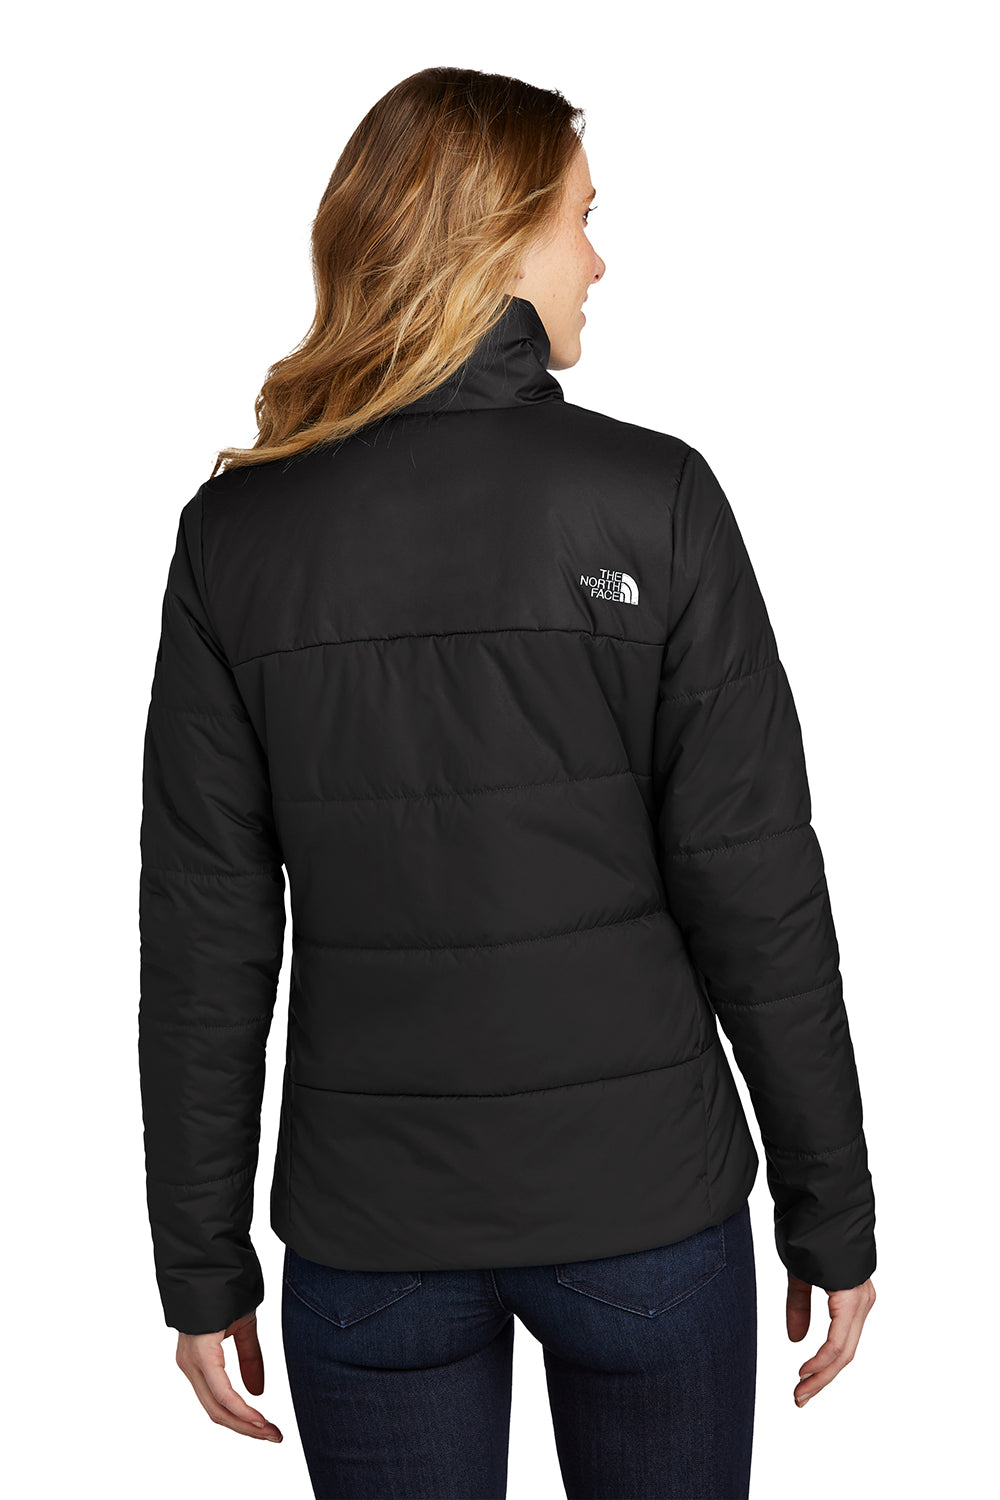 The North Face NF0A7V6K Womens Everyday Insulated Full Zip Jacket Black Back